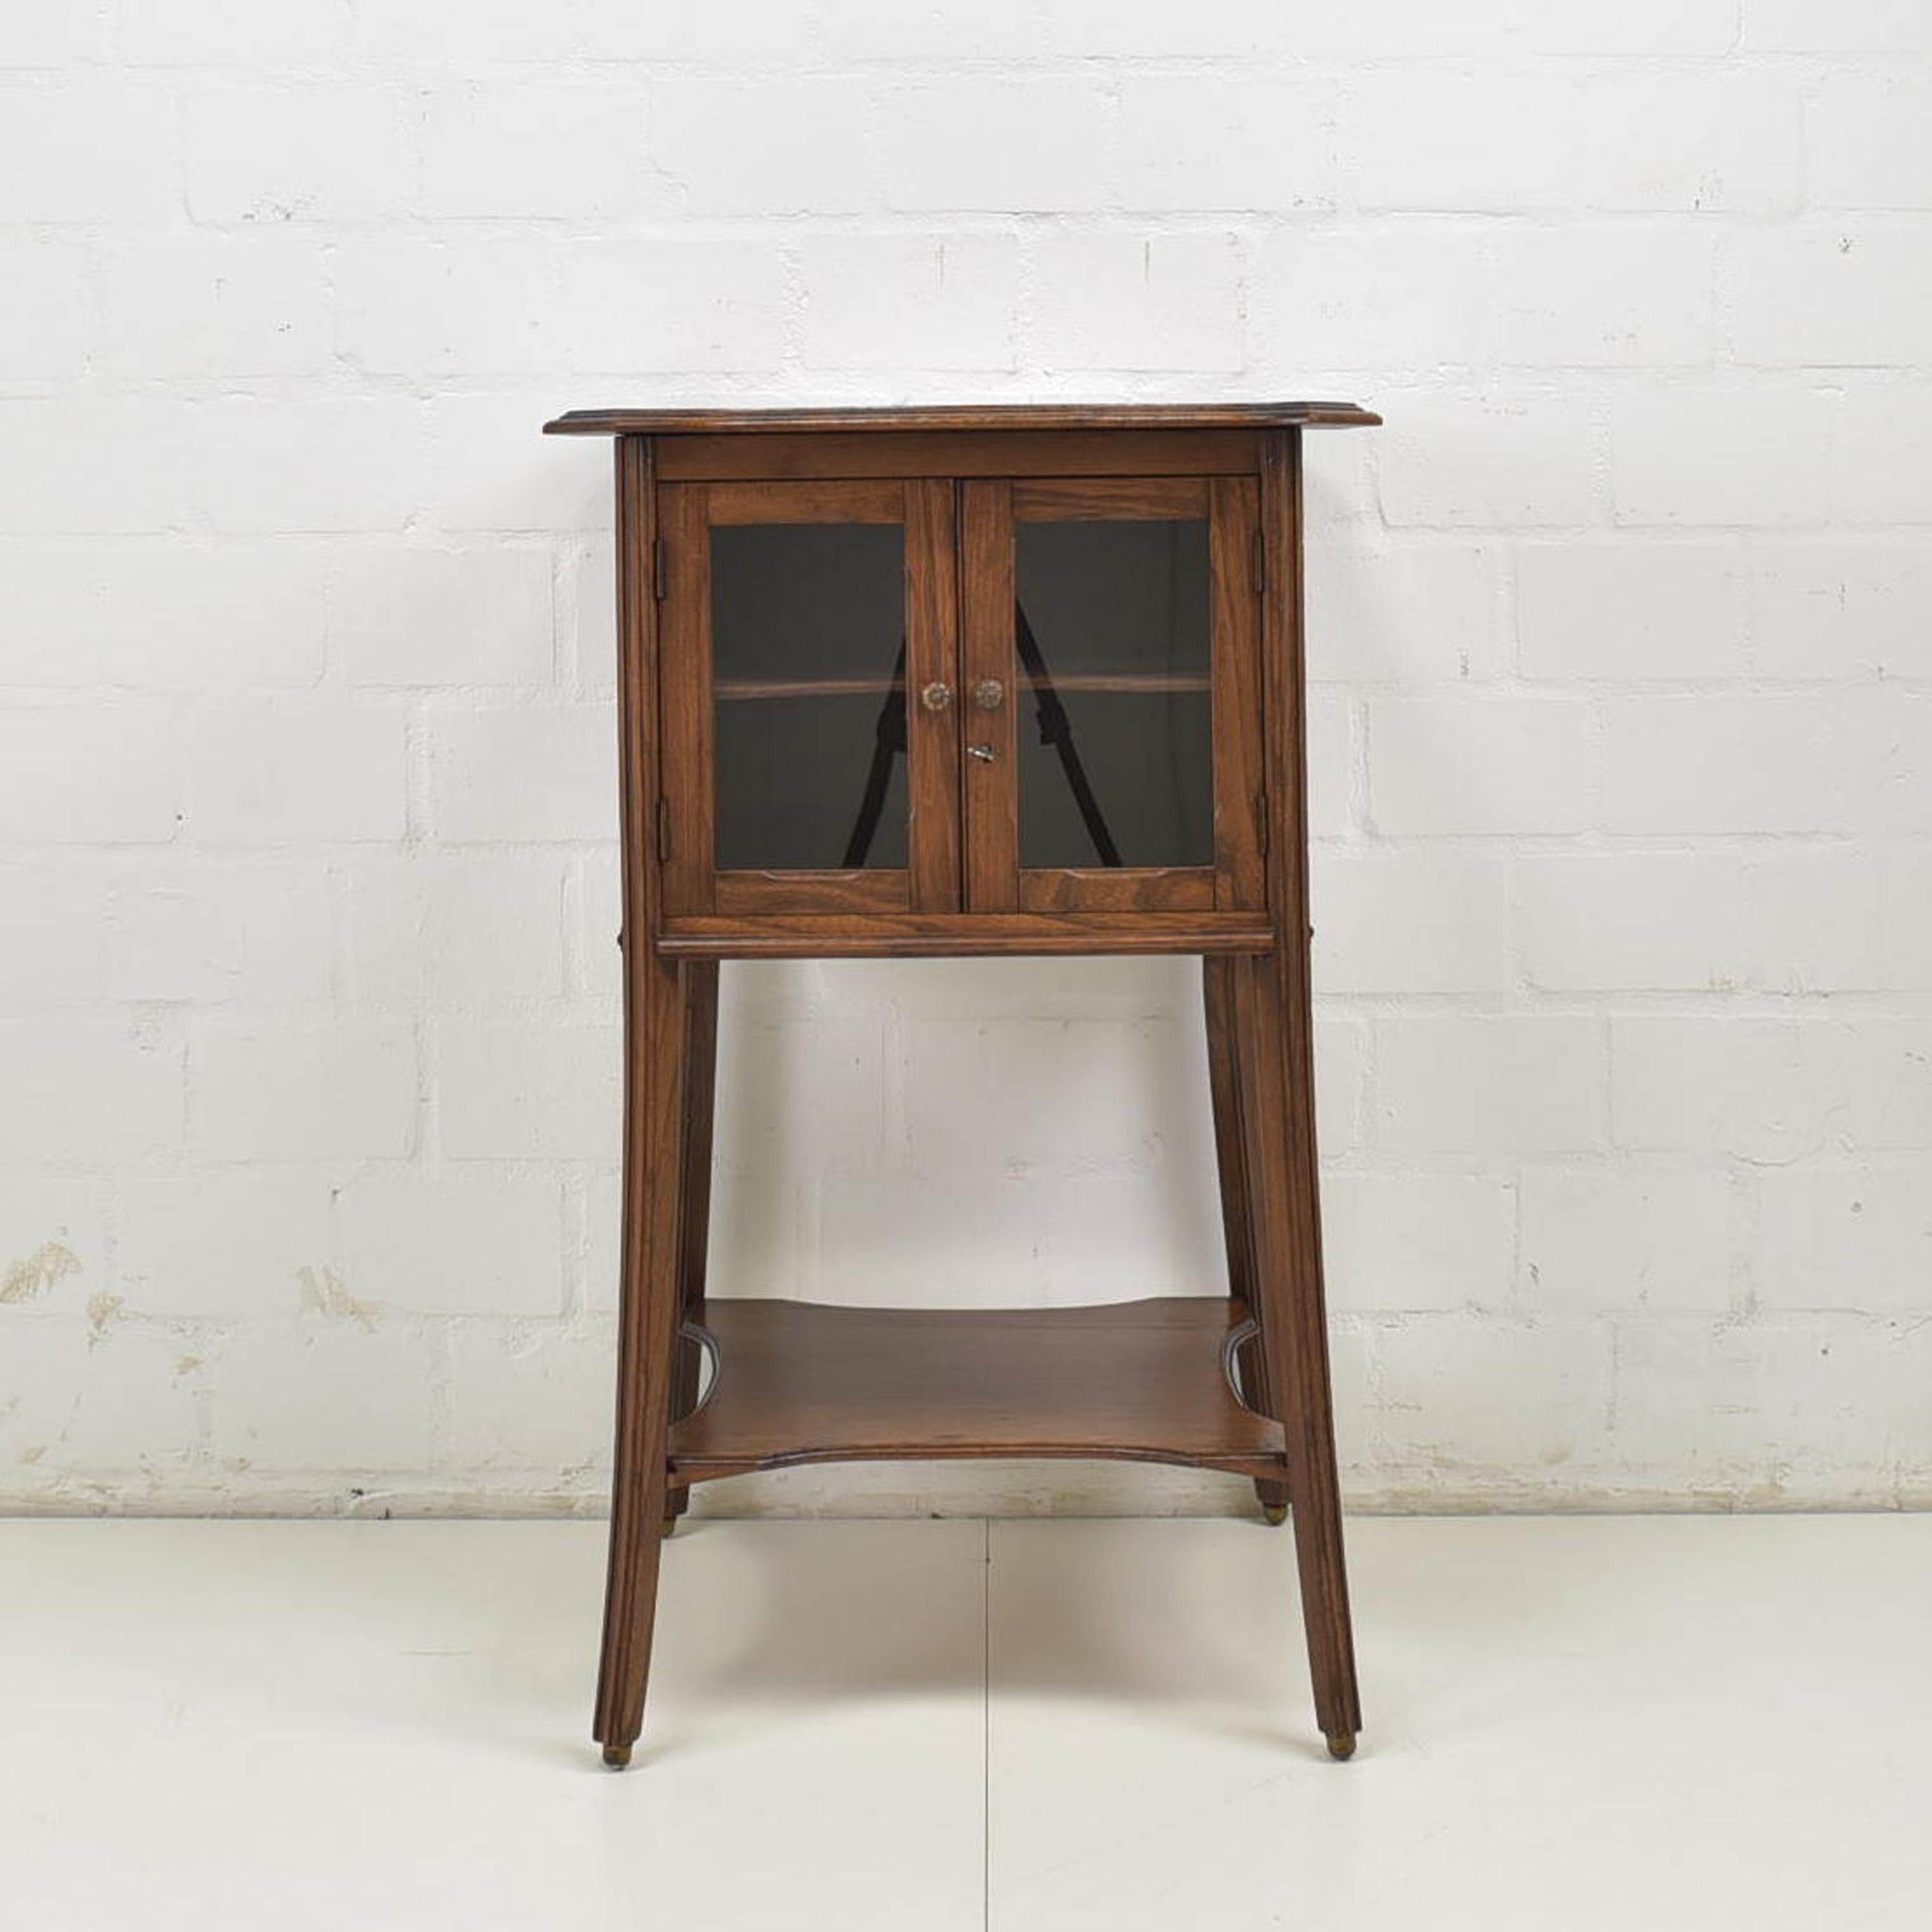 Small showcase restored Art Nouveau around 1920 elm elm side cabinet

Features:
Small, single-door model with glass doors and one shelf
Organic linework
Beautiful patina and grain
Attractive model

Additional information:
Material: Solid